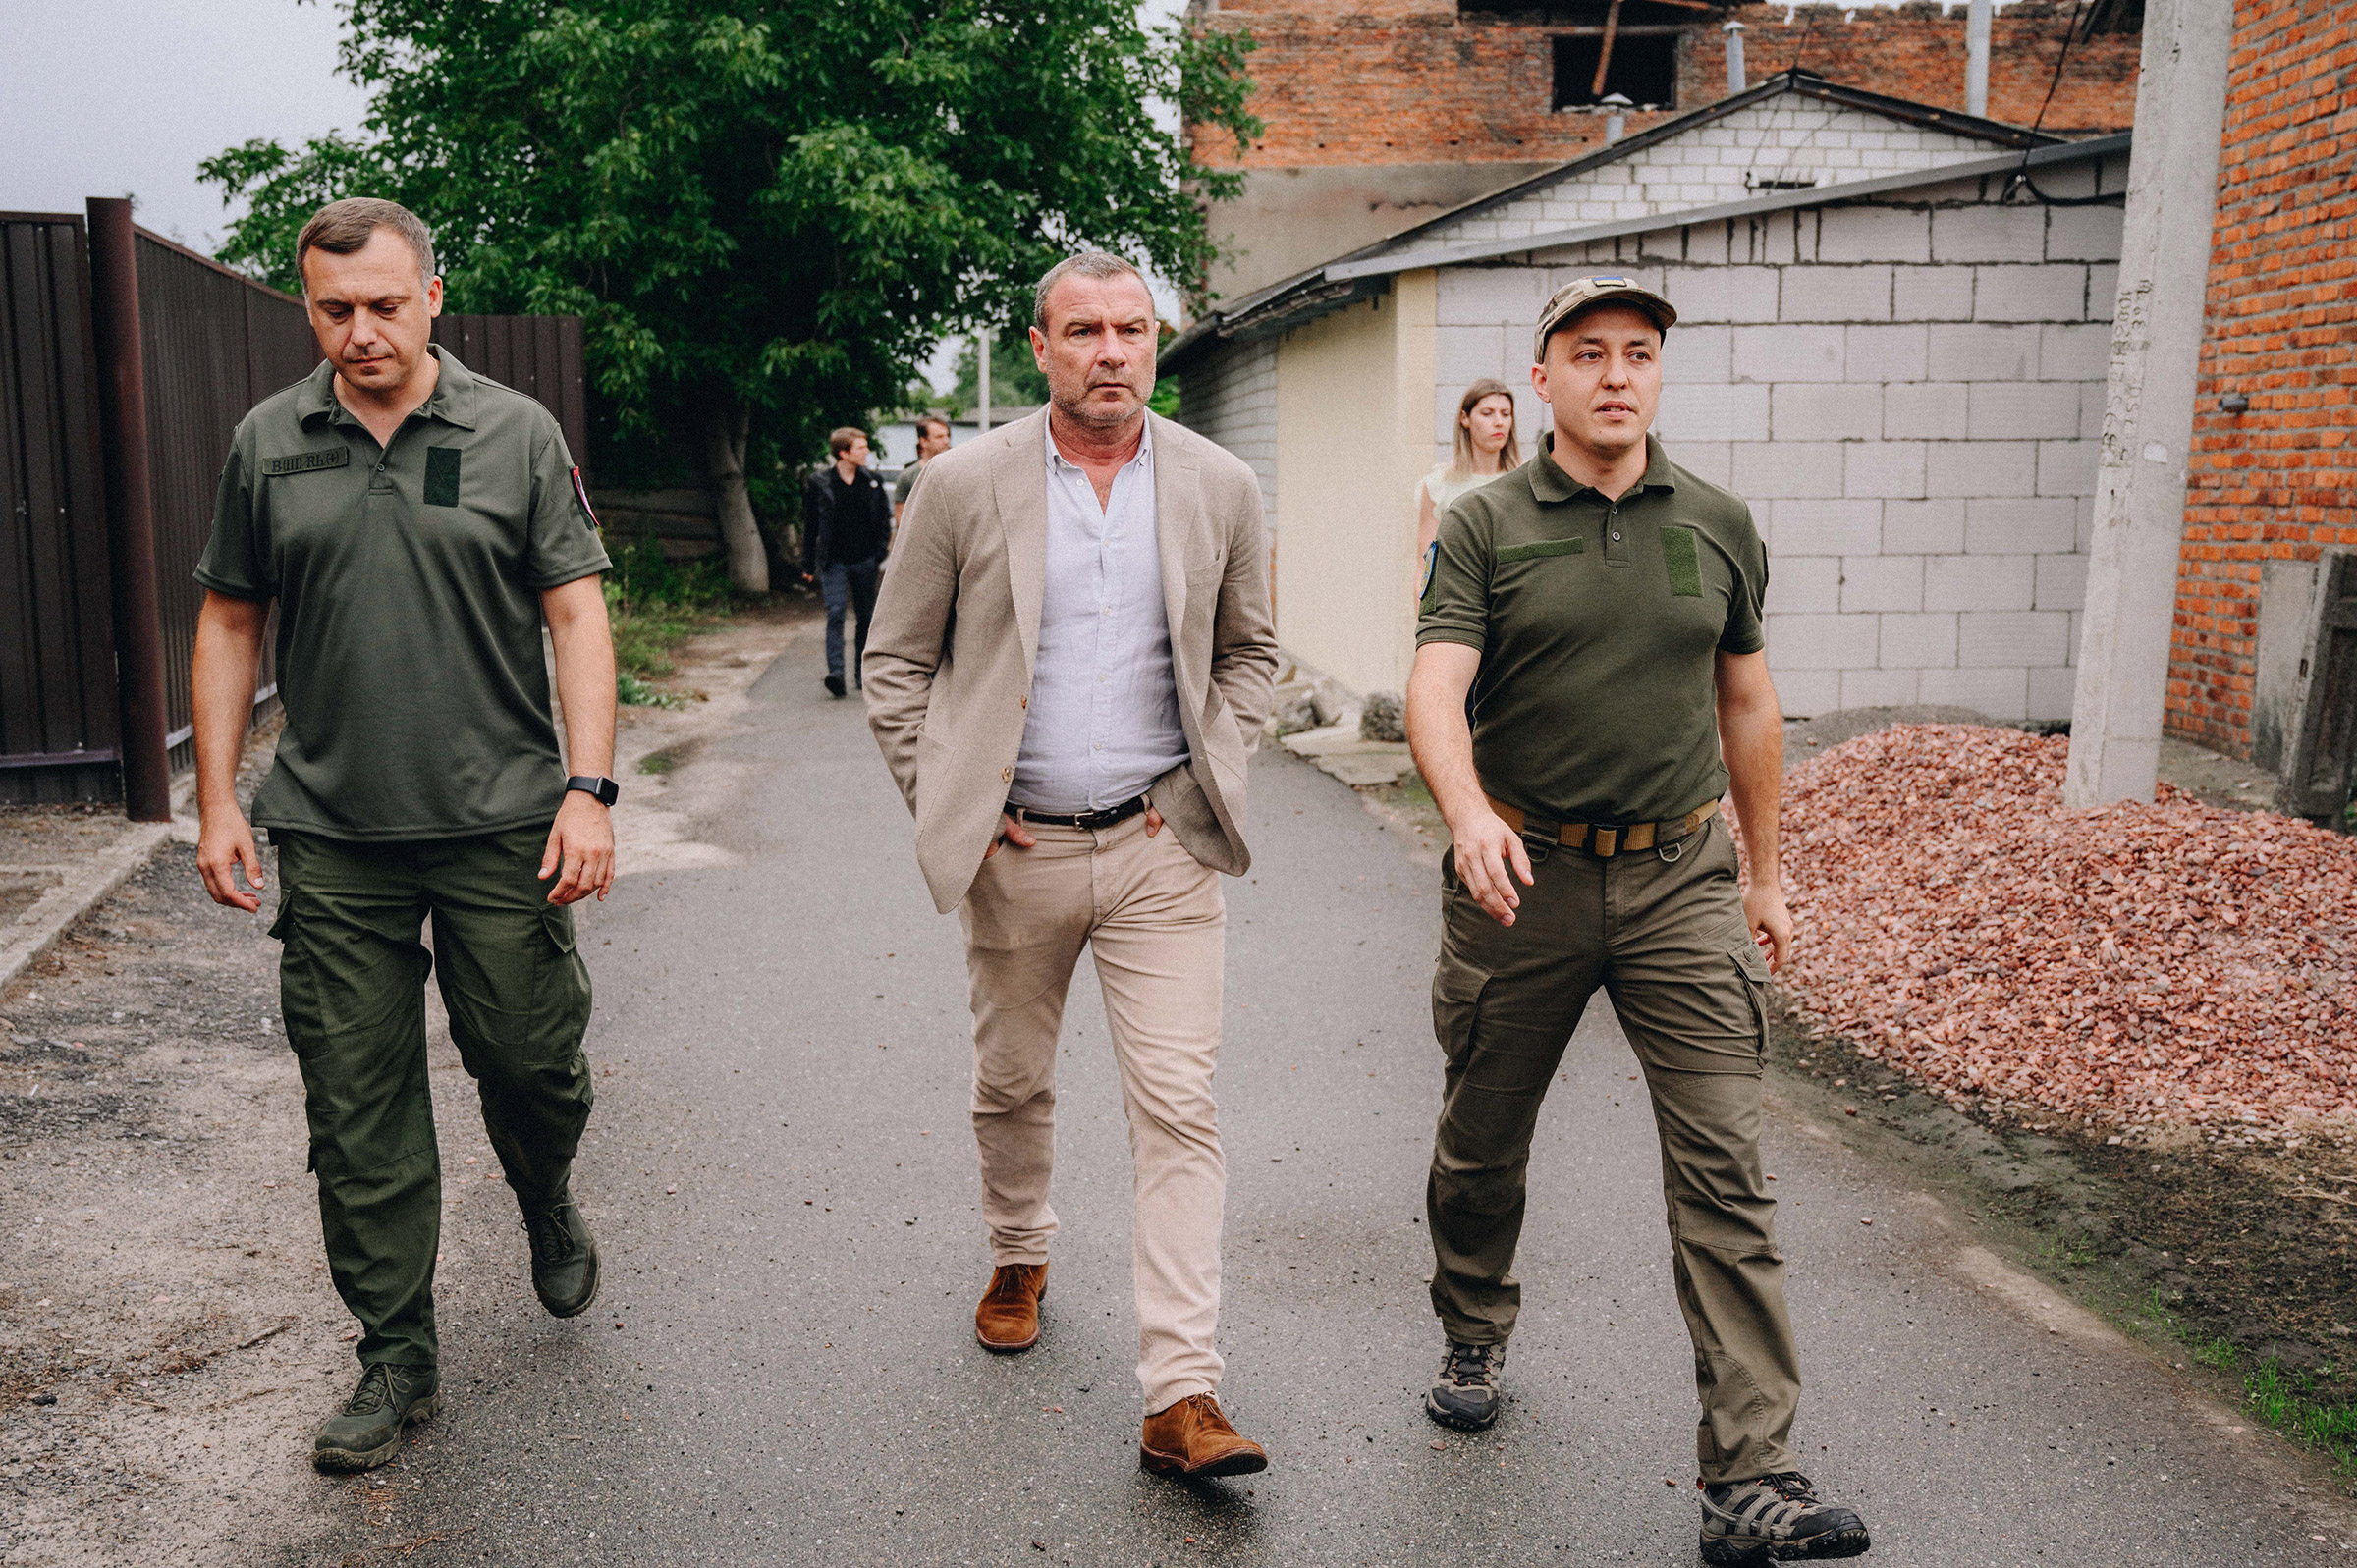 'I've had the privilege of witnessing firsthand the courage and ingenuity of the Ukrainian people, evident not only on the battlefield but also in their relief efforts across the country,' Liev Schreiber writes. (Dan Balashov)